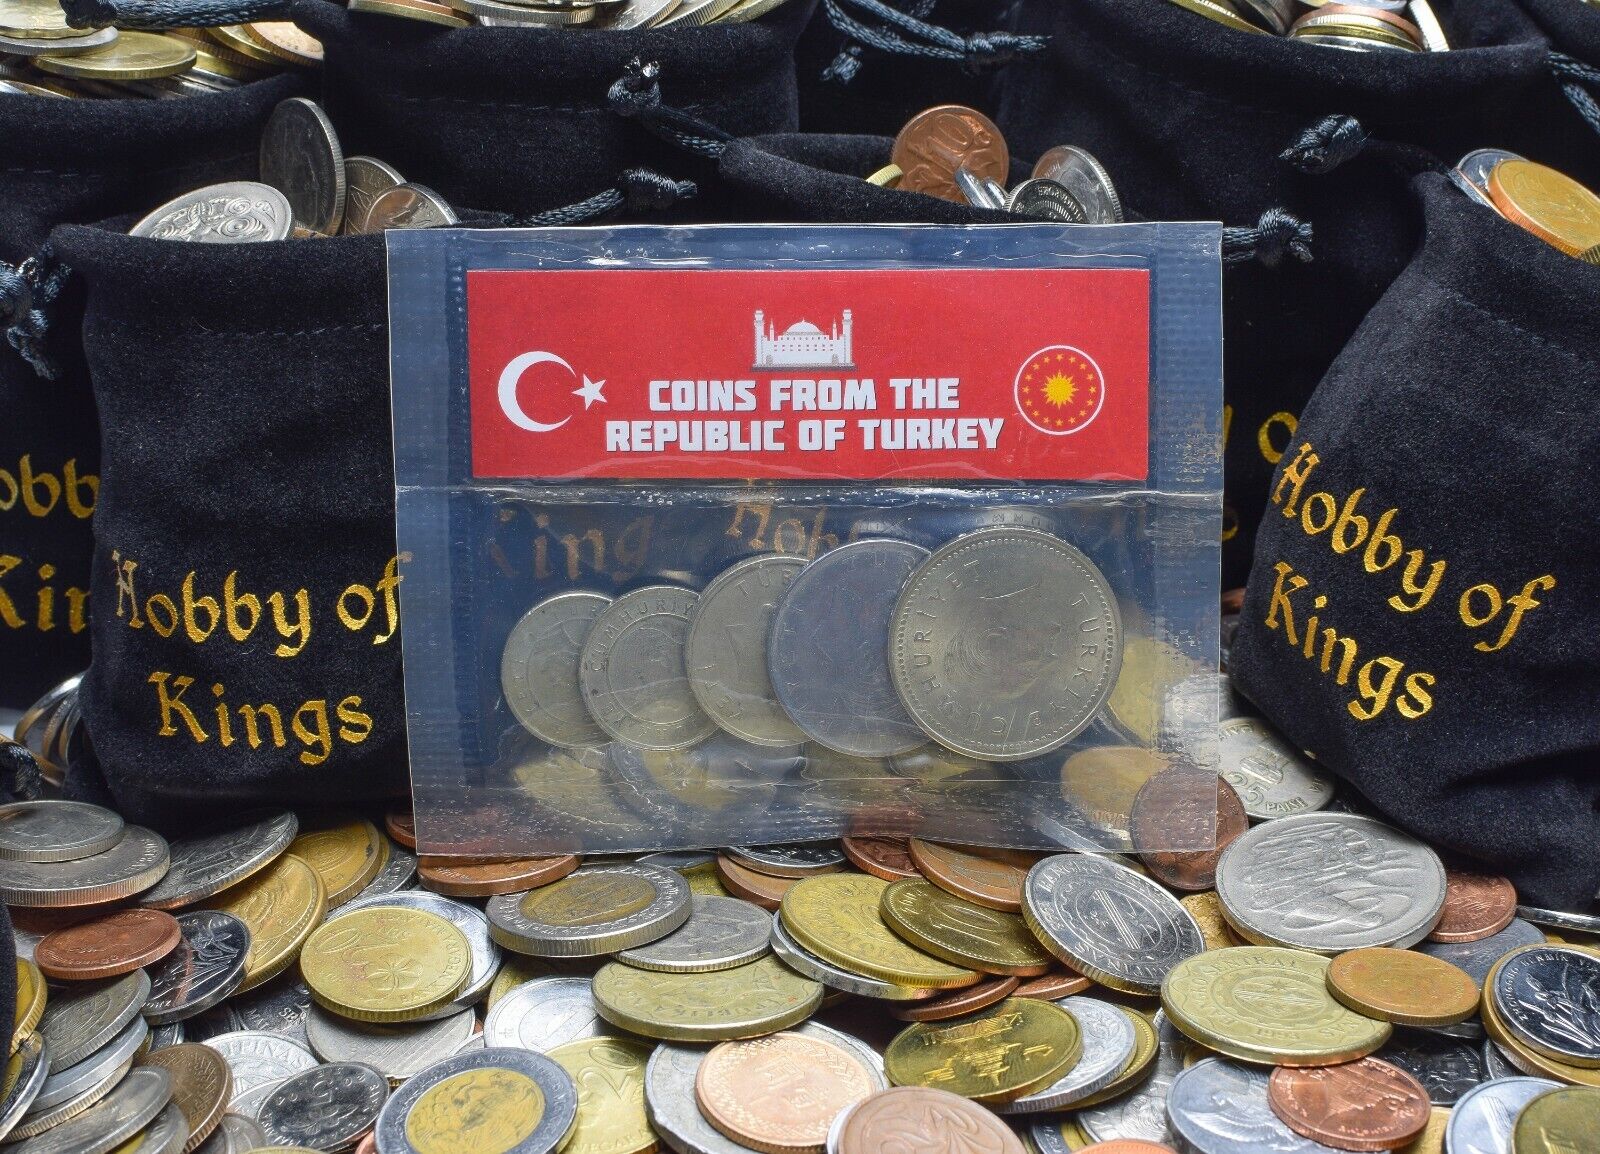 5 TURKISH COIN LOT. DIFFER COLLECTIBLE COINS FROM MIDDLE EAST. FOREIGN CURRENCY Без бренда - фотография #2